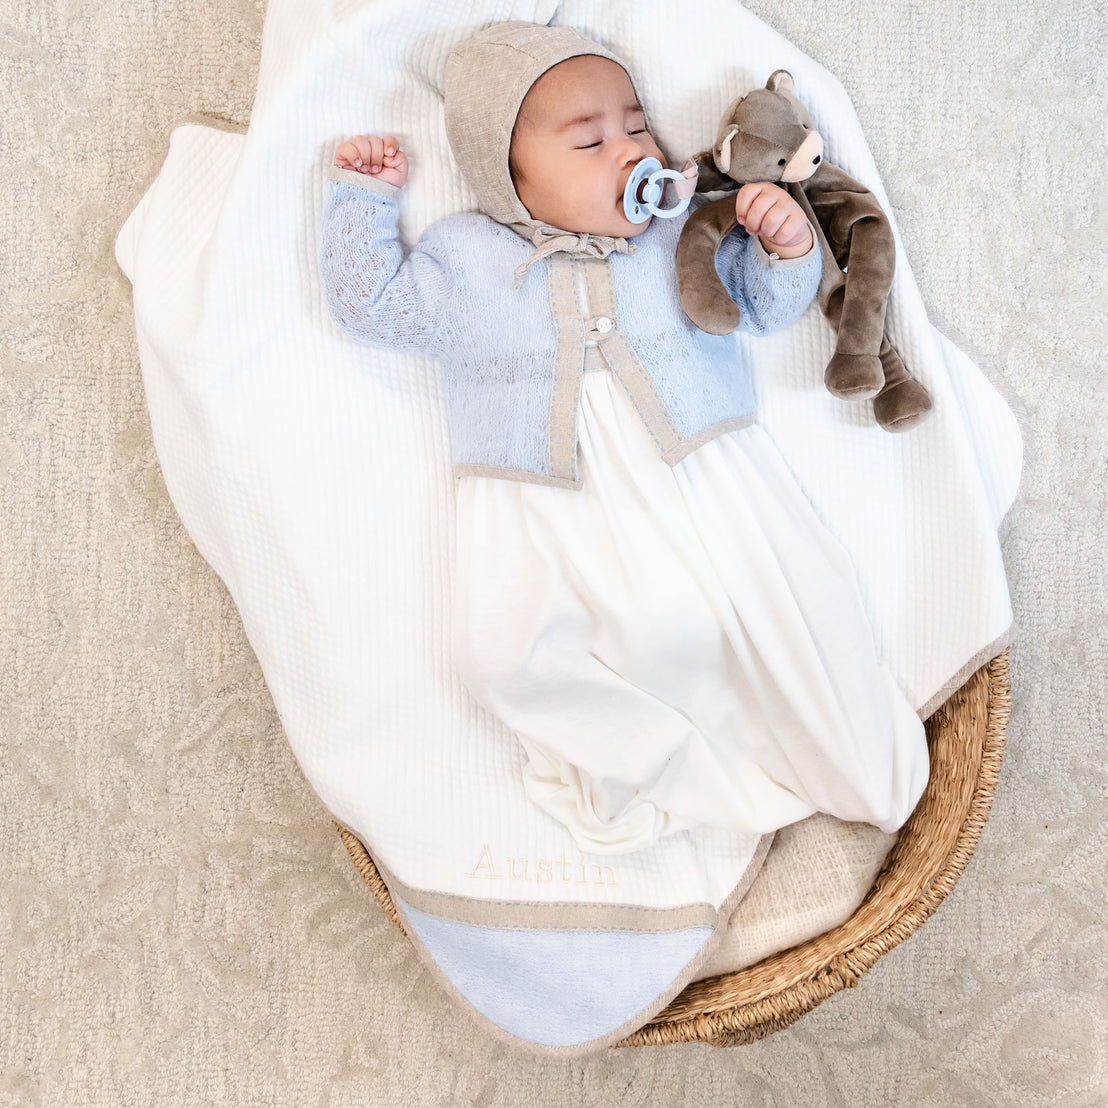 A newborn baby in a white and blue outfit lies in a circular boutique basket, with an heirloom plush bear toy by its side, all on an Austin Personalized Blanket.